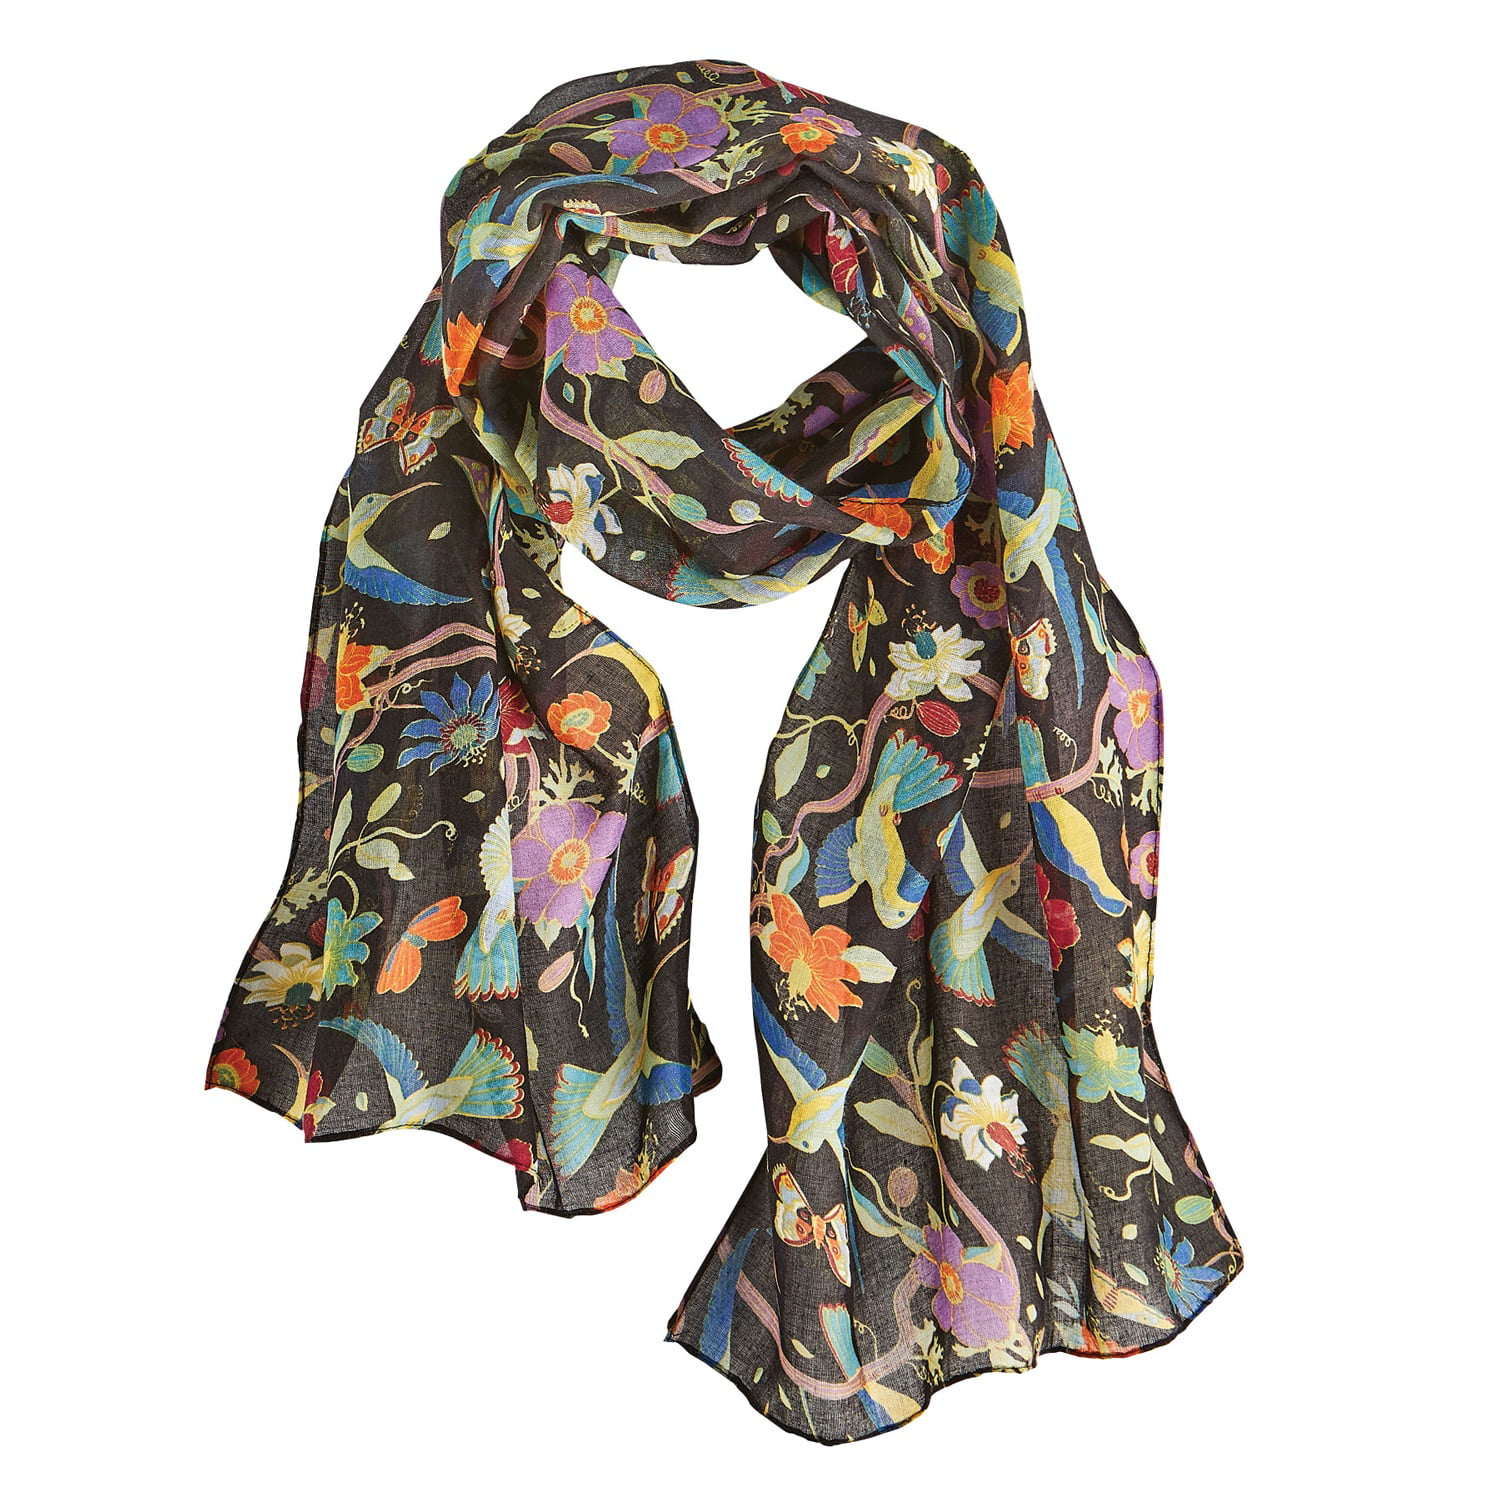 Butterfly Print Scarf Neck Shawl Scarves Summer Wrap Stole Gift Idea UK 